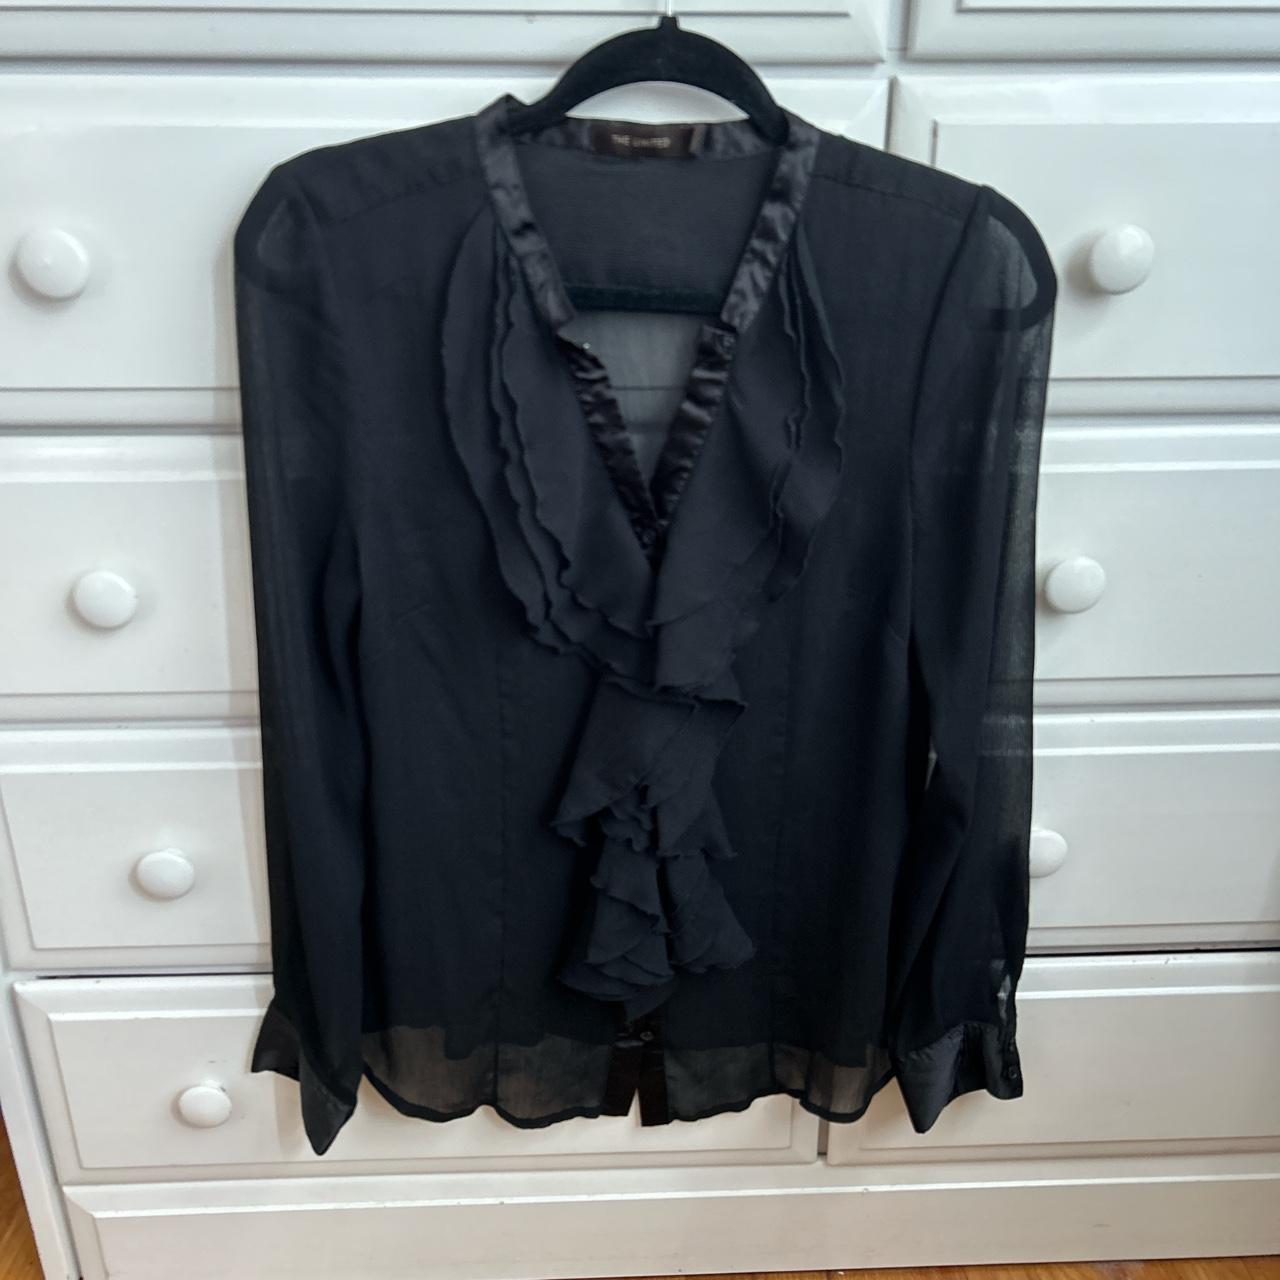 SHEER BLACK RUFFLE BLOUSE - brand: the limited -... - Depop